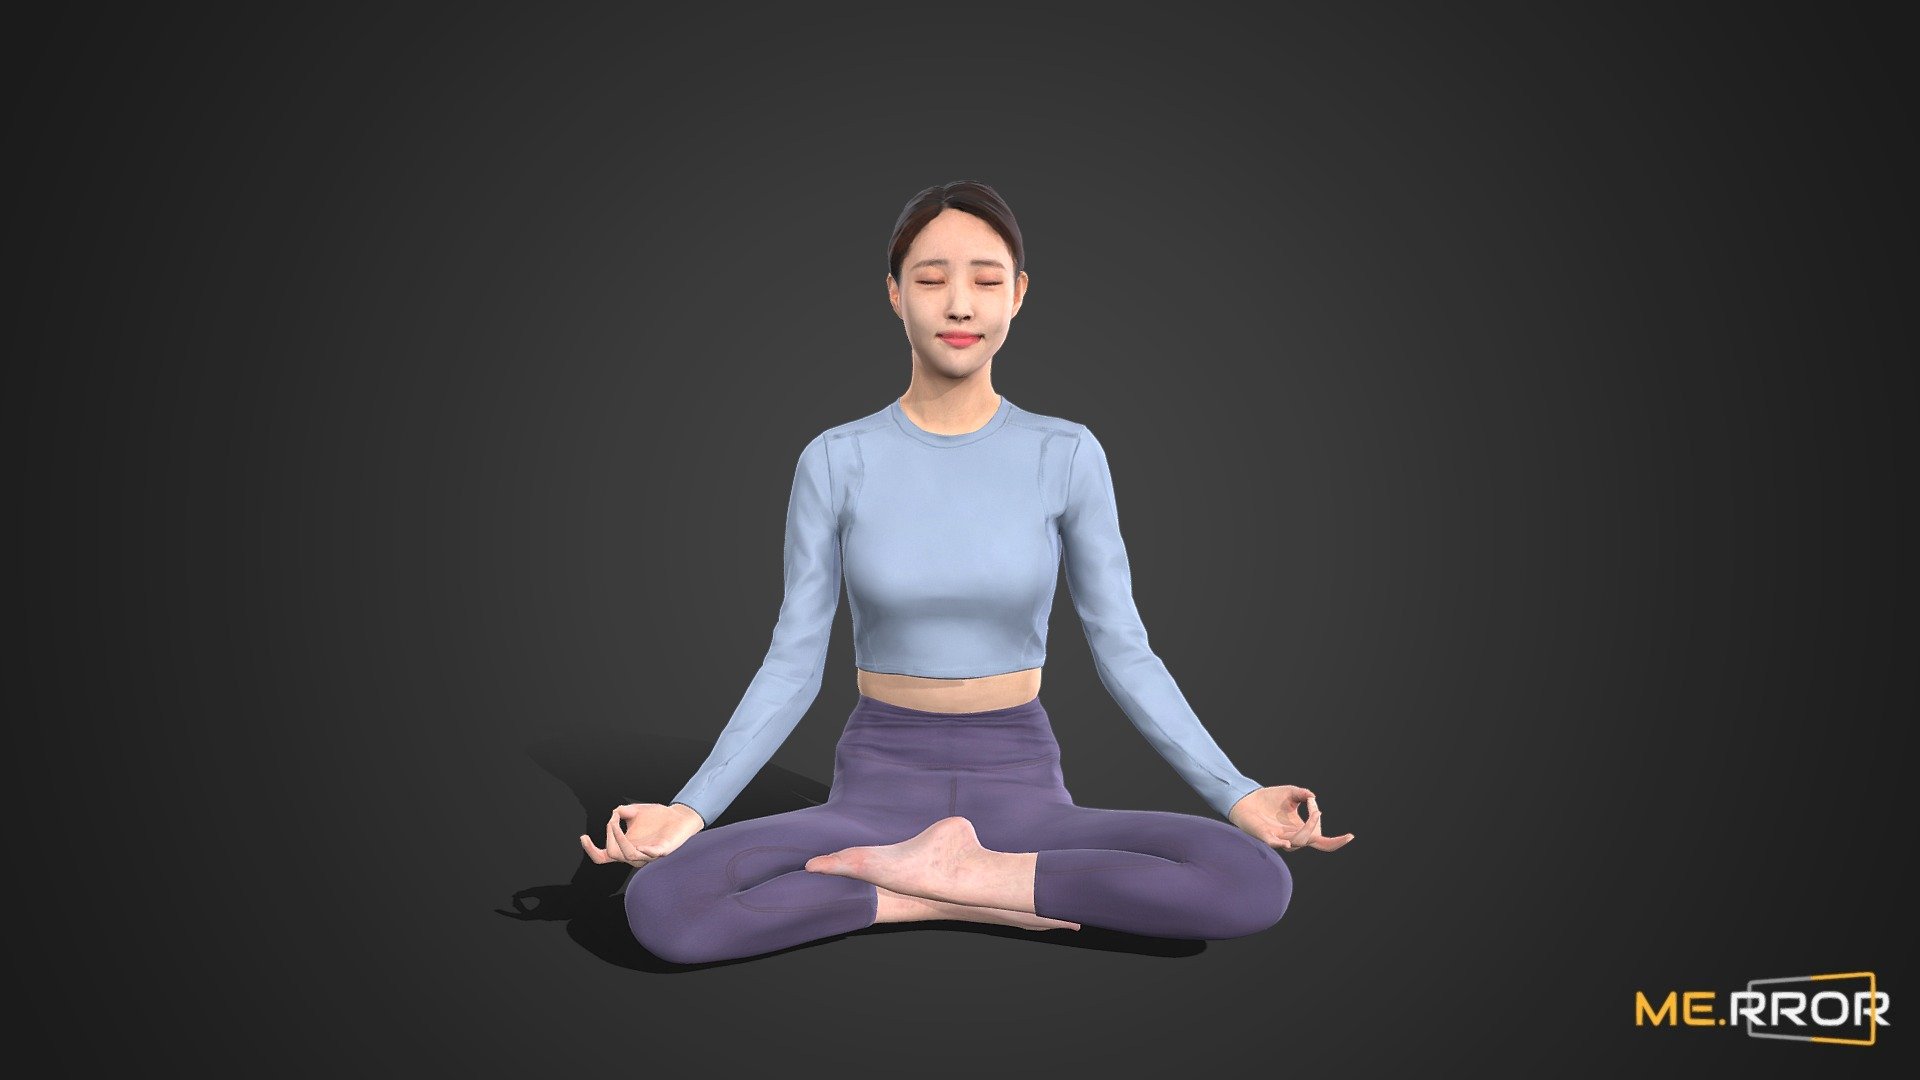 ME.RROR


From 3D models of Asian individuals to a fresh selection of free assets available each month - explore a richer diversity of photorealistic 3D assets at the ME.RROR asset store!

https://me-rror.com/store




[Model Info]




Model Formats : FBX, MAX


Texture Maps (8K) : Diffuse




Find Scanned - 2M poly version here: https://sketchfab.com/3d-models/asian-woman-scan-posed-20-2m-poly-2bd98abc4044433a8a2387c4d9f16e7a



Find the topologized version here : https://sketchfab.com/3d-models/game-ready-asian-woman-scan-posed-21-f686a39fd61440518d35eee3b9473e50

If you encounter any problems using this model, please feel free to contact us. We'd be glad to help you.



[About ME.RROR]

Step into the future with ME.RROR, South Korea's leading 3D specialist. Bespoke creations are not just possible; they are our specialty.

Service areas:




3D scanning

3D modeling

Virtual human creation

Inquiries: https://merror.channel.io/lounge - Asian Woman Scan_Posed 21 30K poly - 3D model by ME.RROR (@merror) 3d model